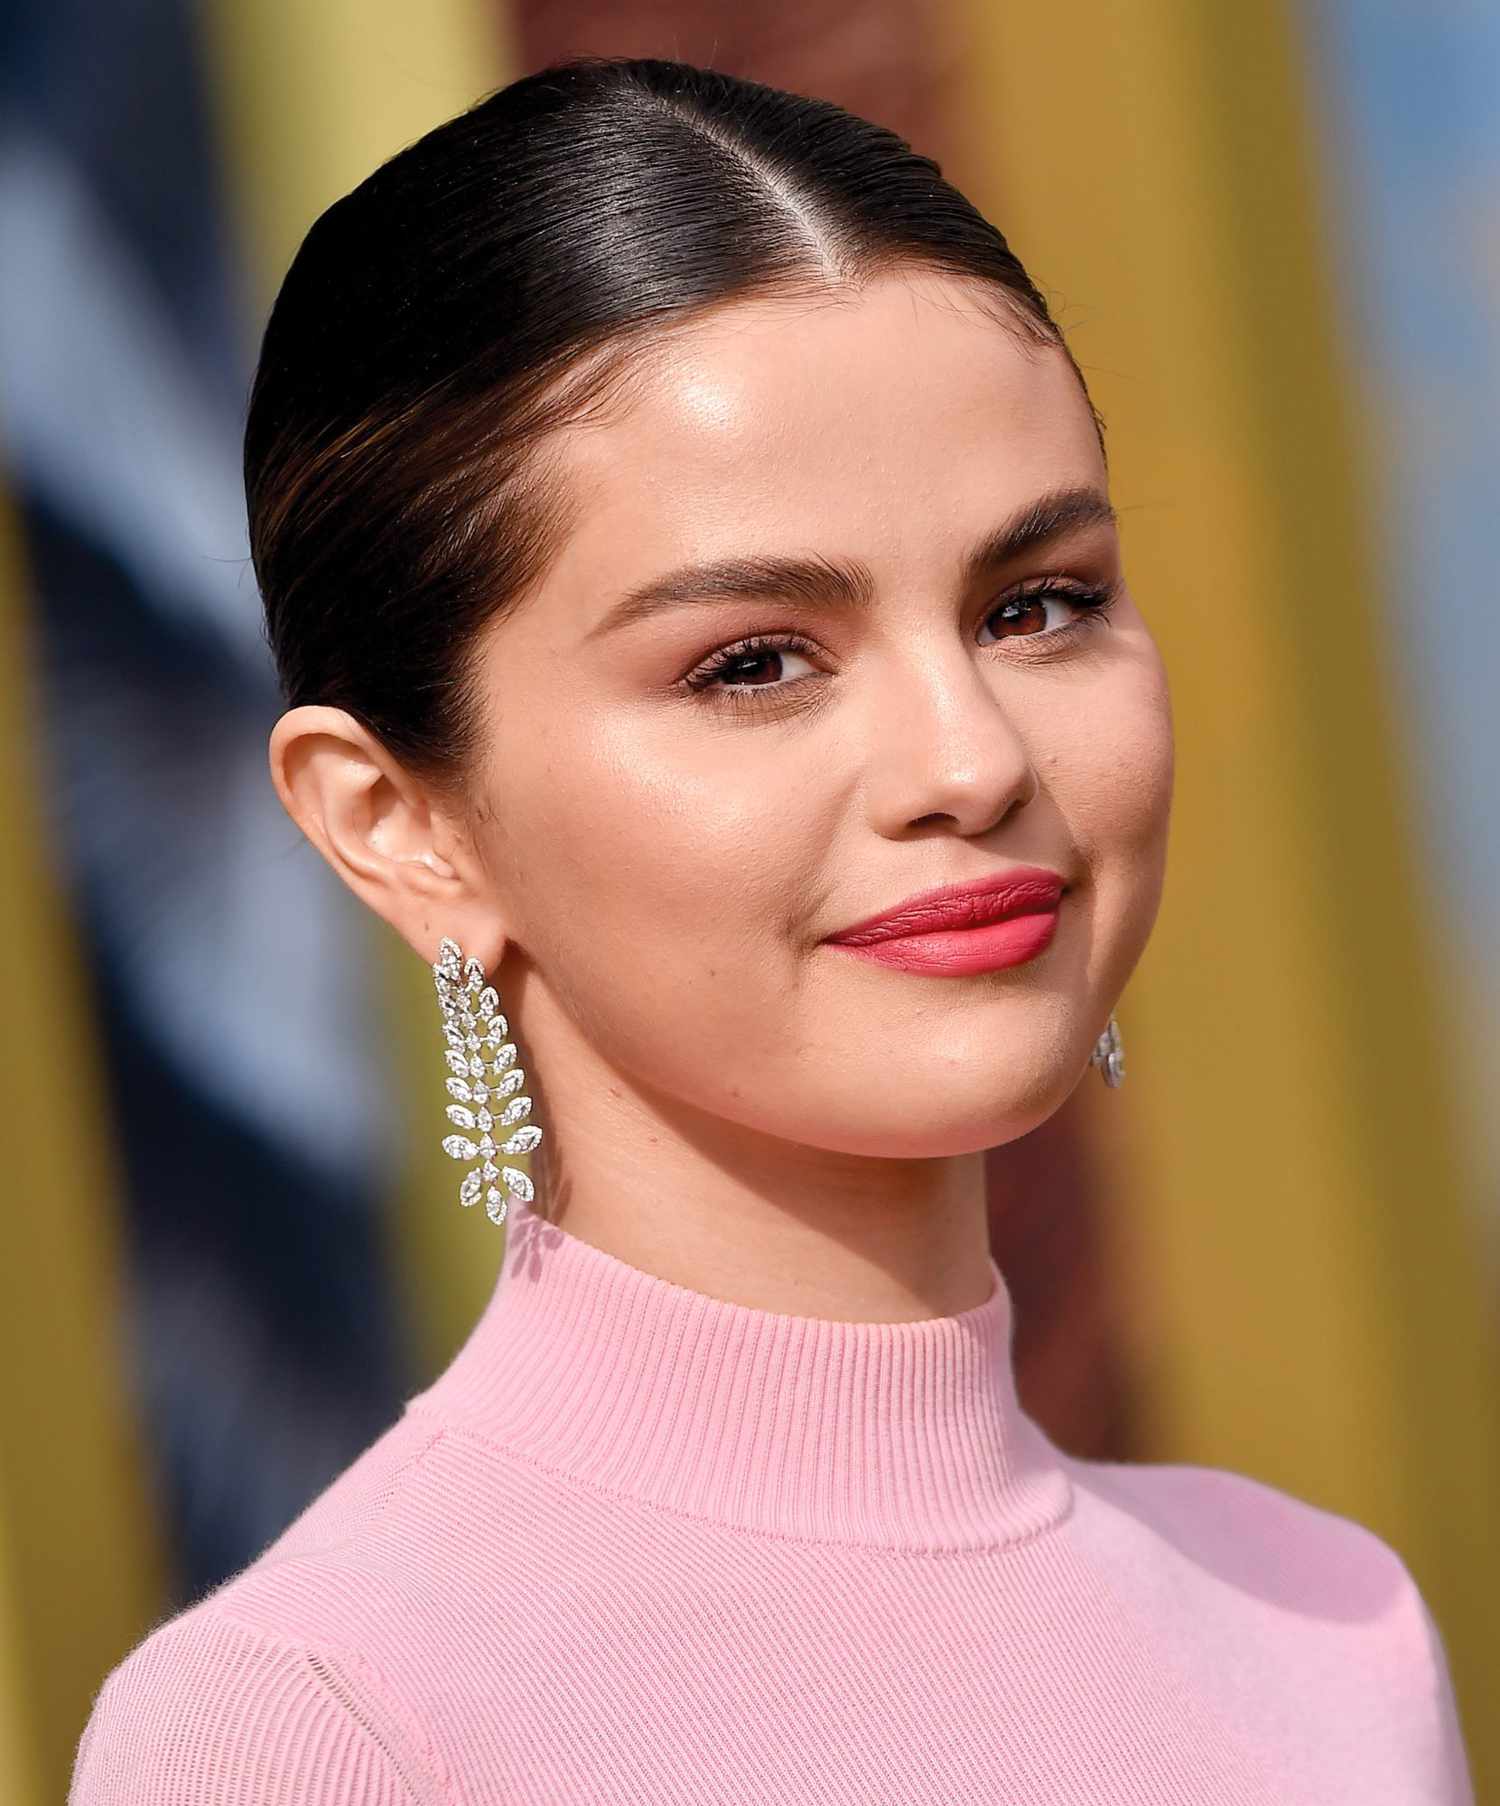 Selena Gomez reveals launch date for her Rare Beauty line, EntertainmentSA News South Africa